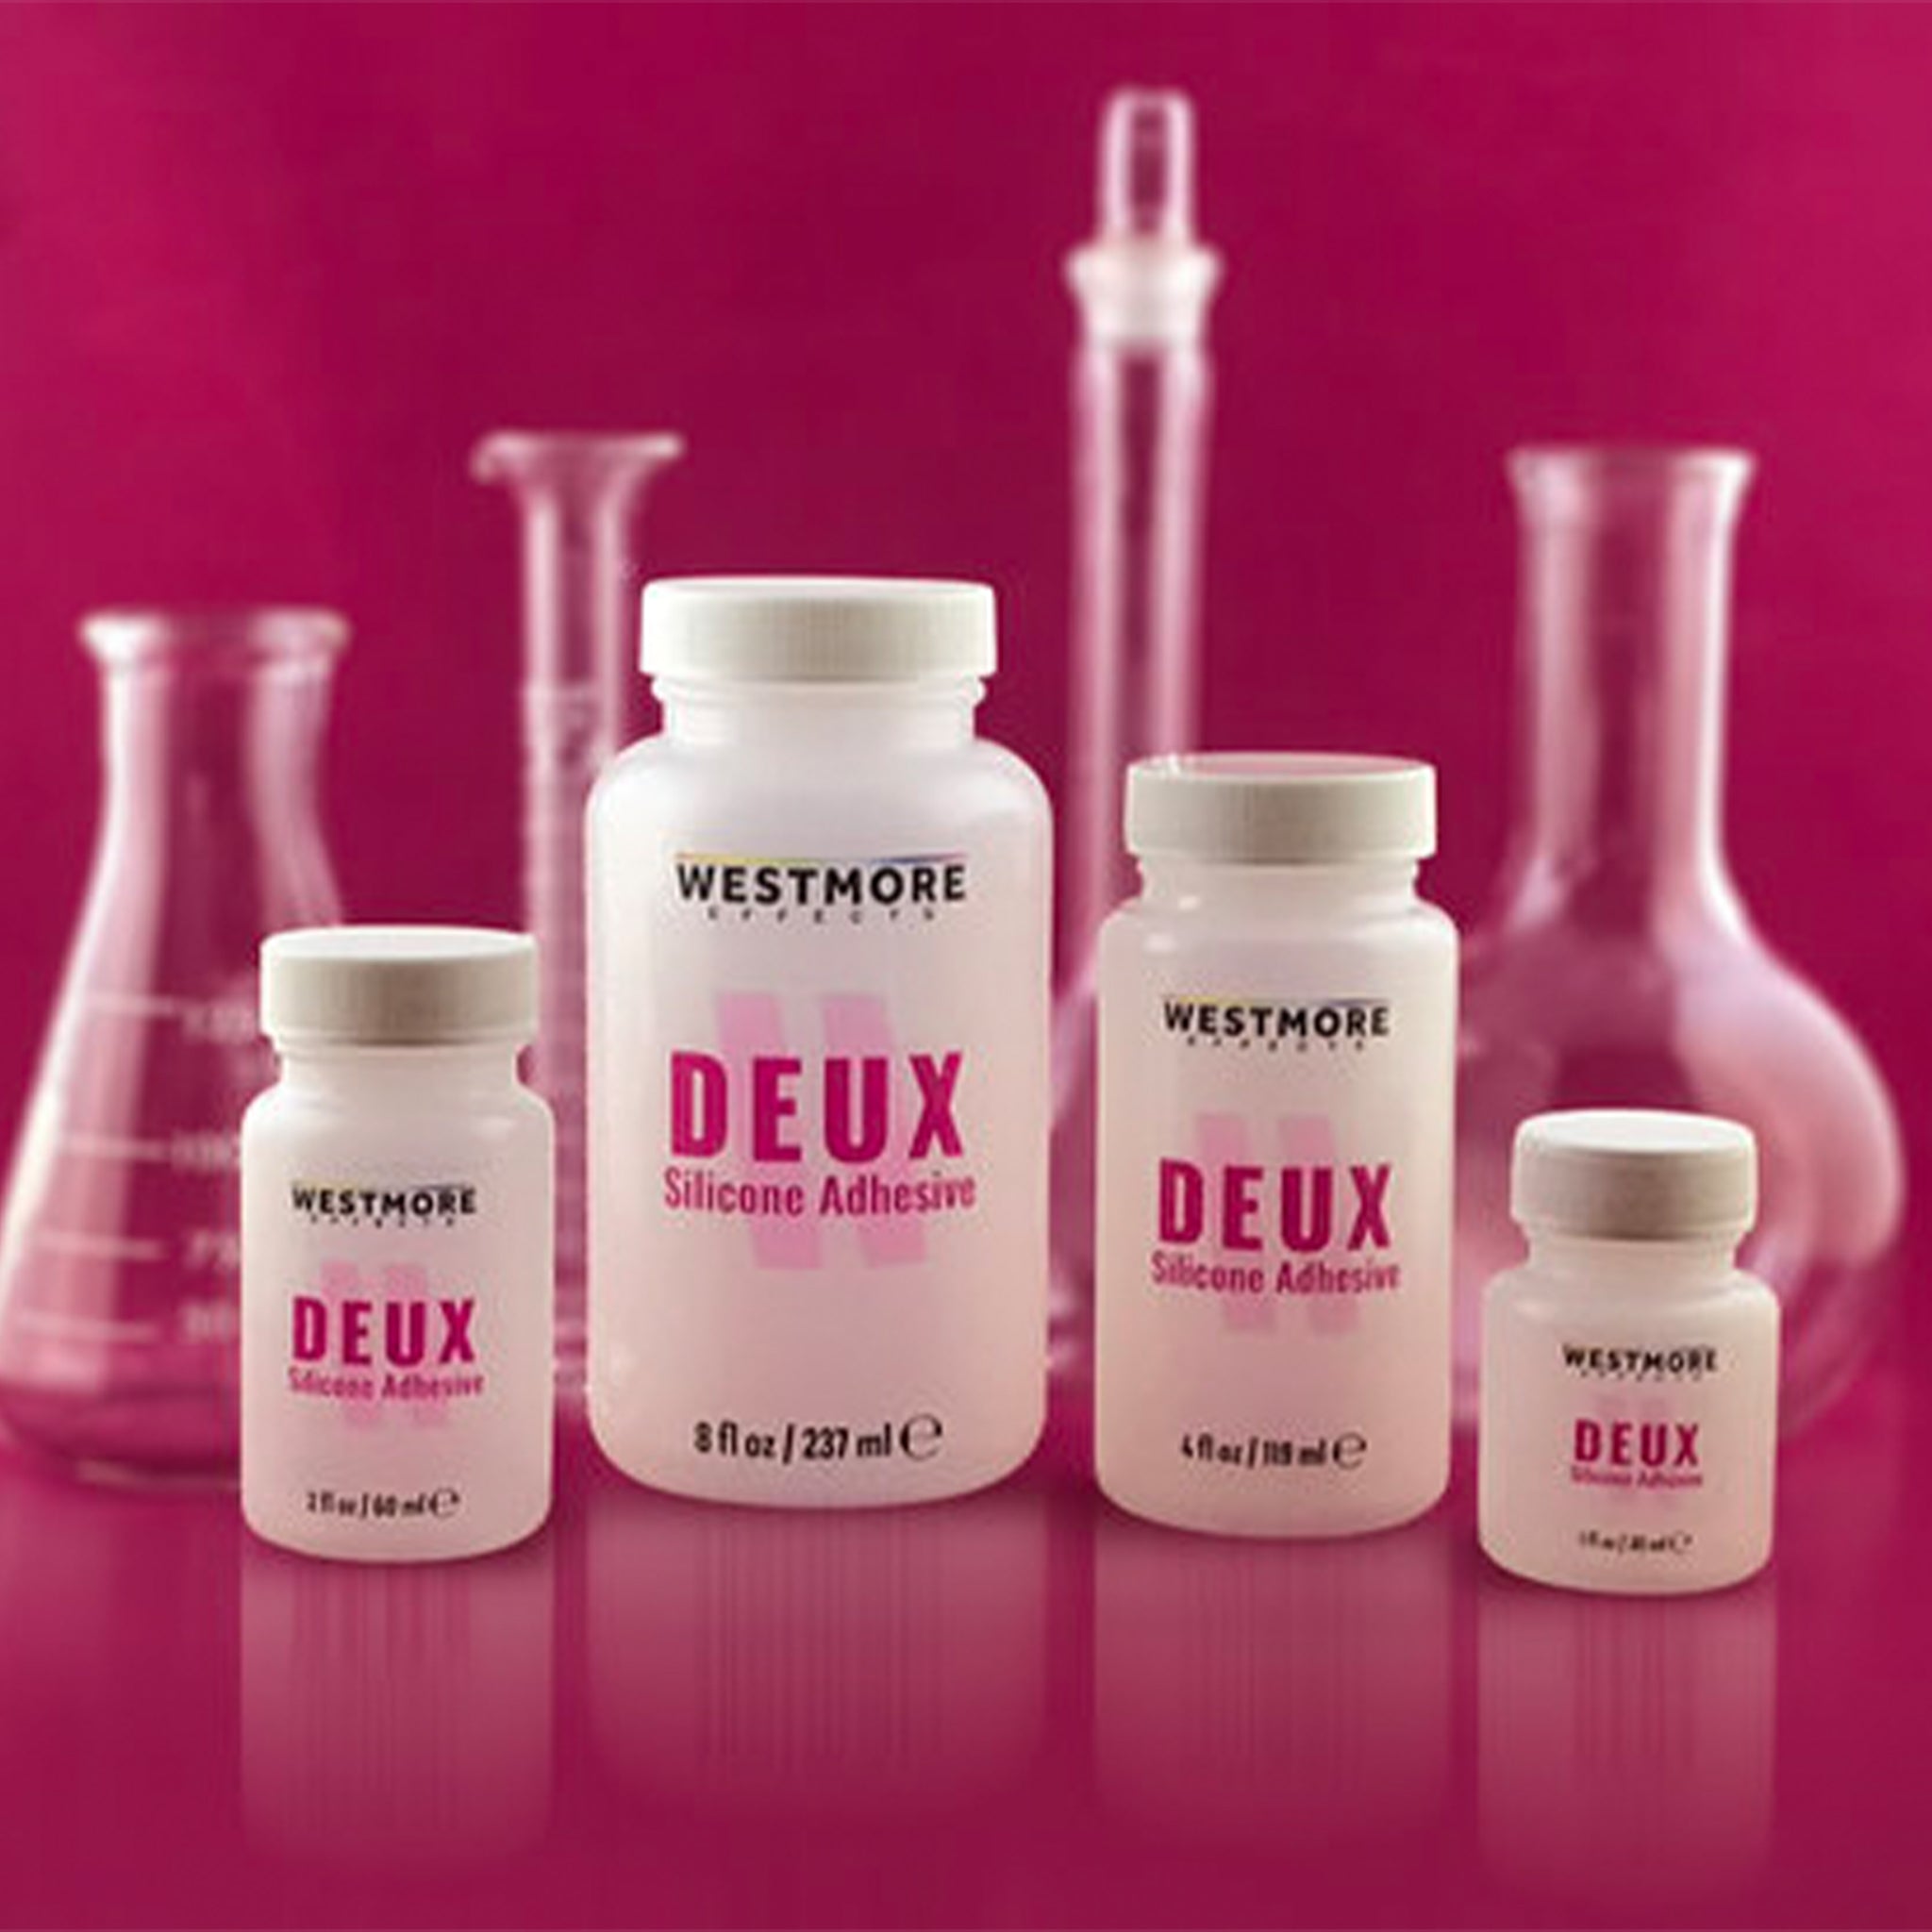 Westmore FX DEUX : Silicone Adhesive